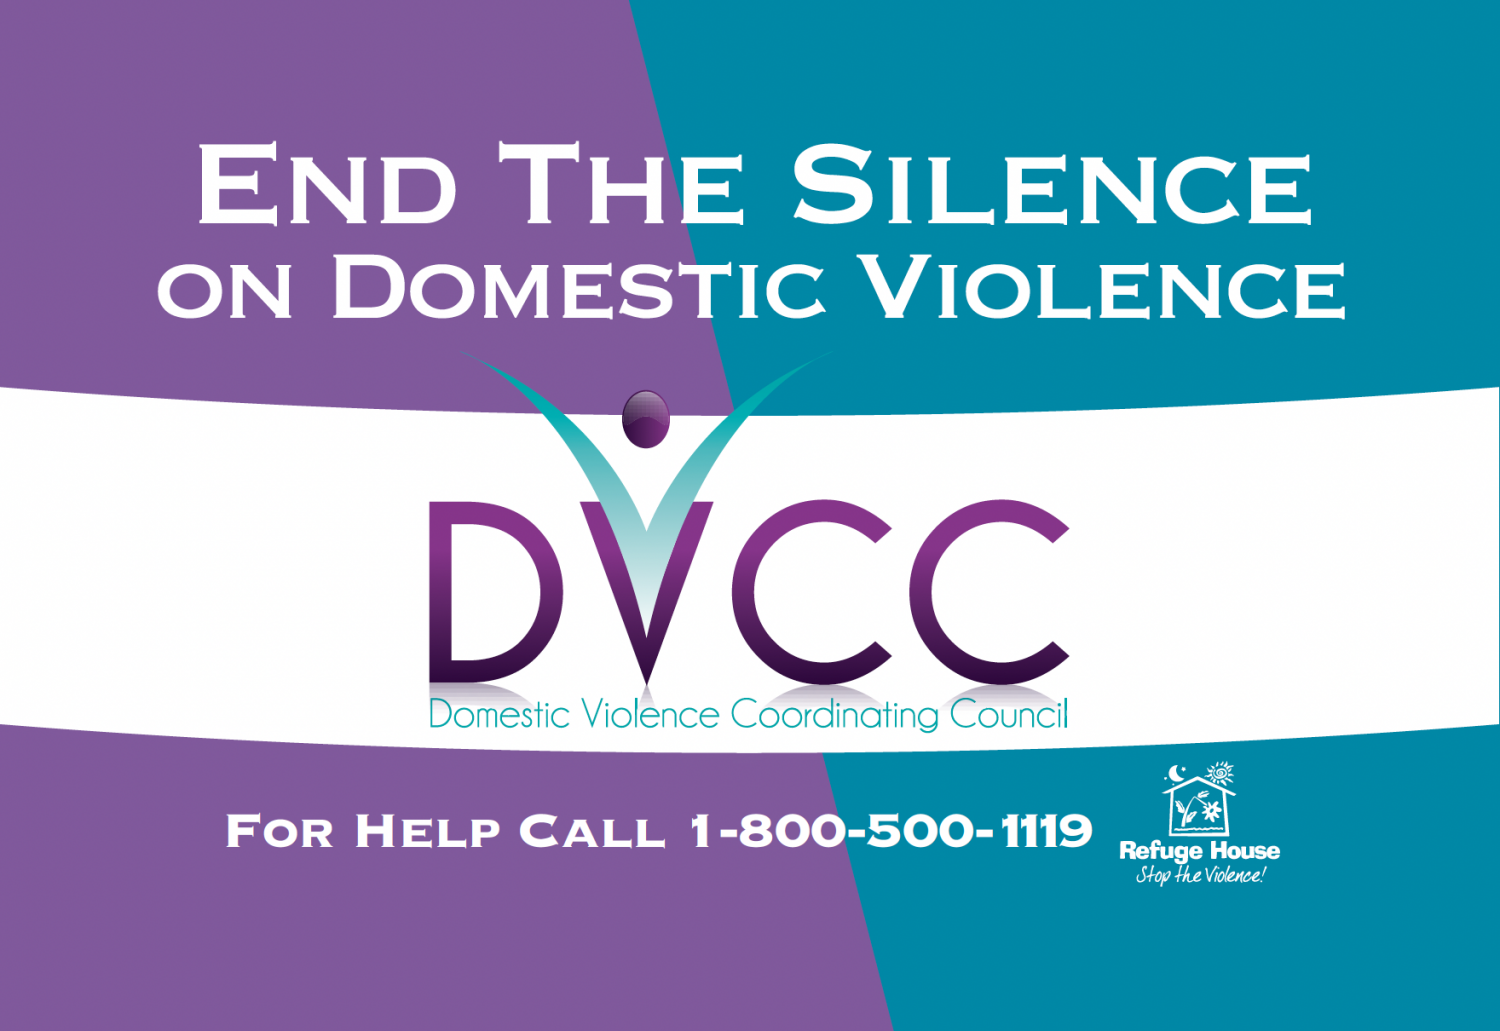 "End the Silence on Domestic Violence. For help call 1-800-500-1119"